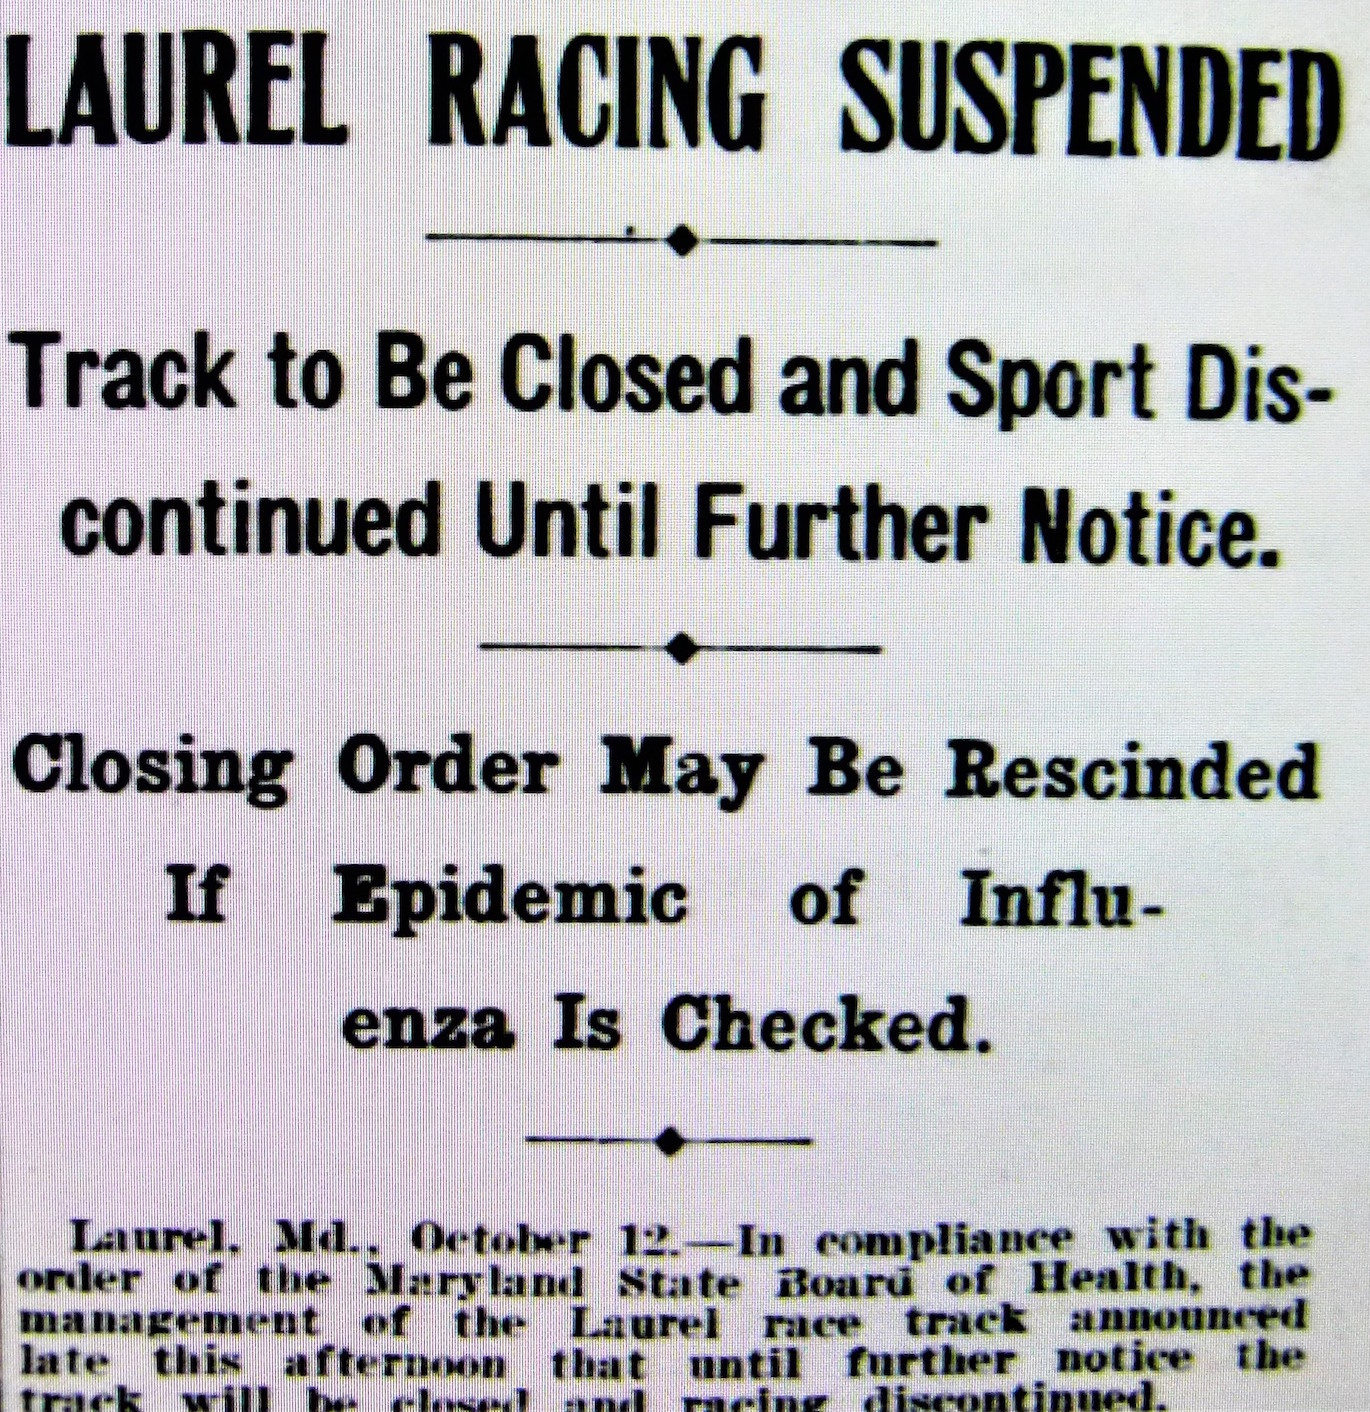 News of the suspension of racing at Laurel hit the front page of the October 13 Daily Racing Form